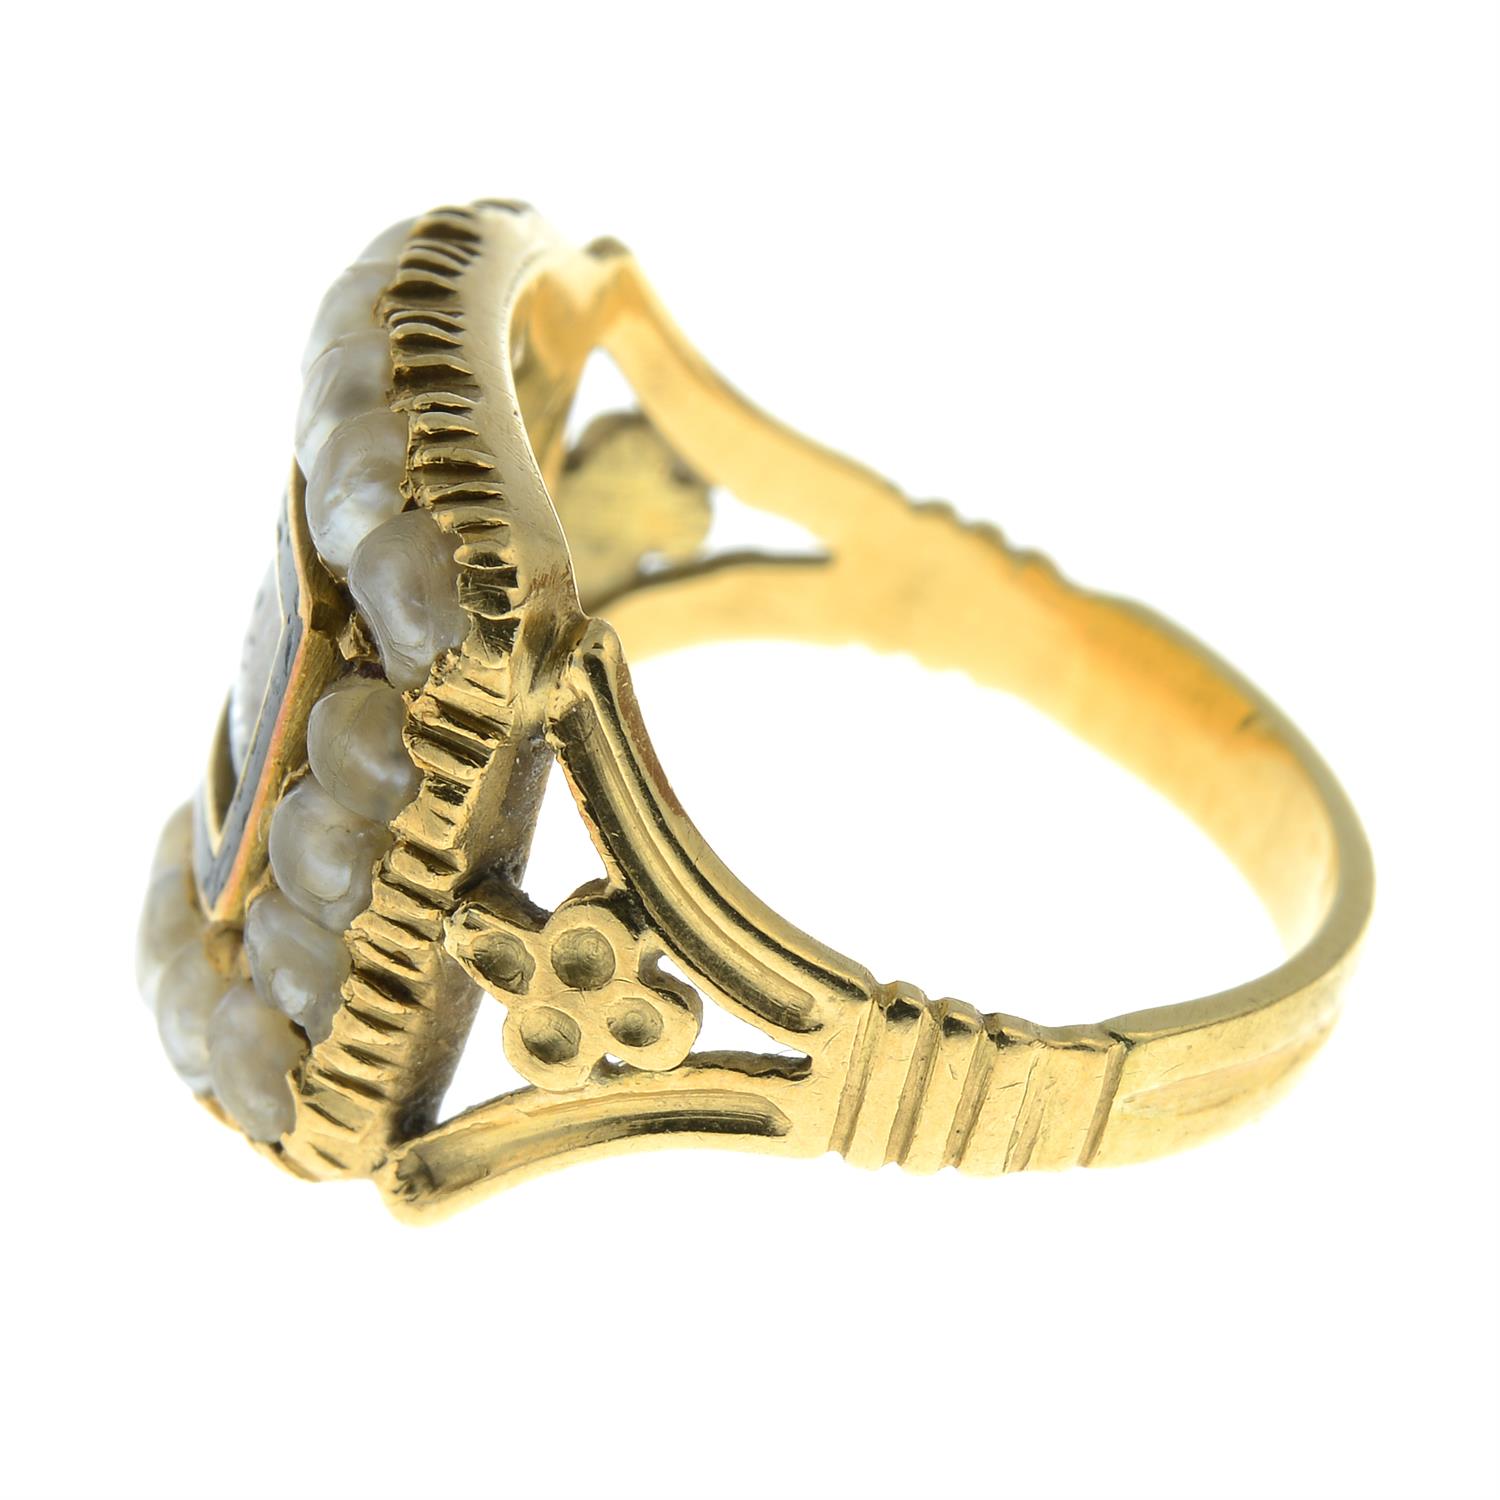 A late Georgian 18ct gold glazed woven hair memorial ring, with black enamel and split pearl - Image 3 of 5